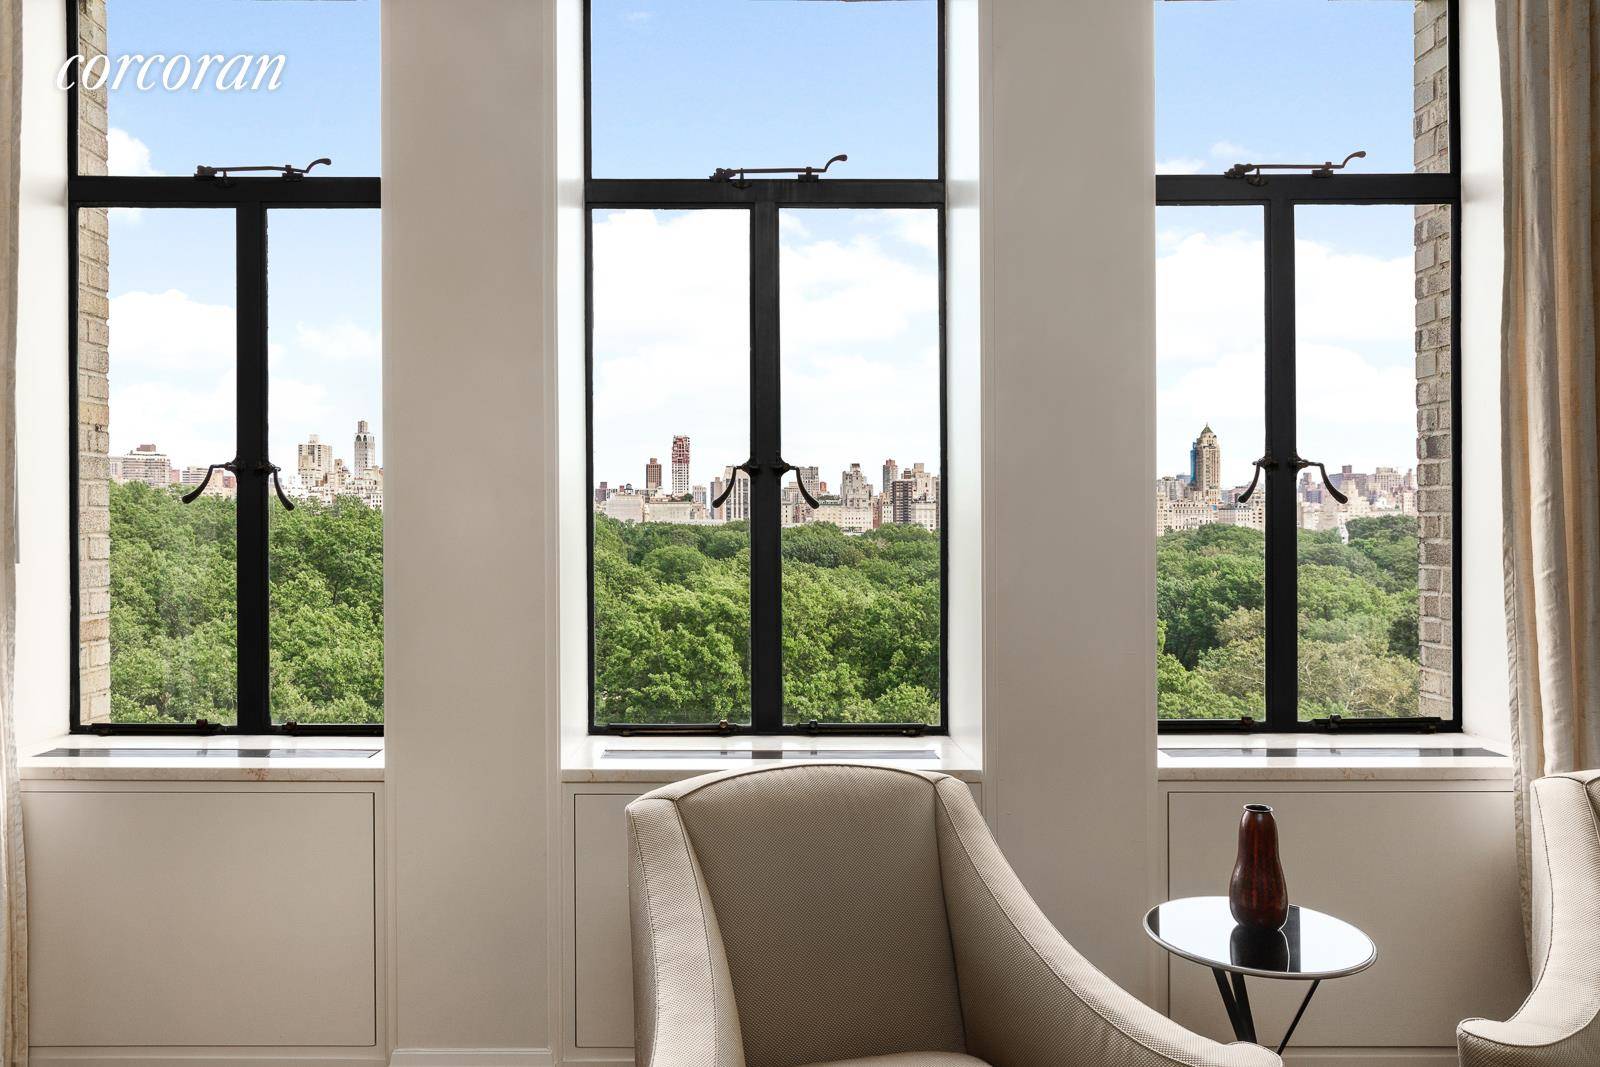 211 Central Park West 10F is an exquisite museum quality three bedroom residence.